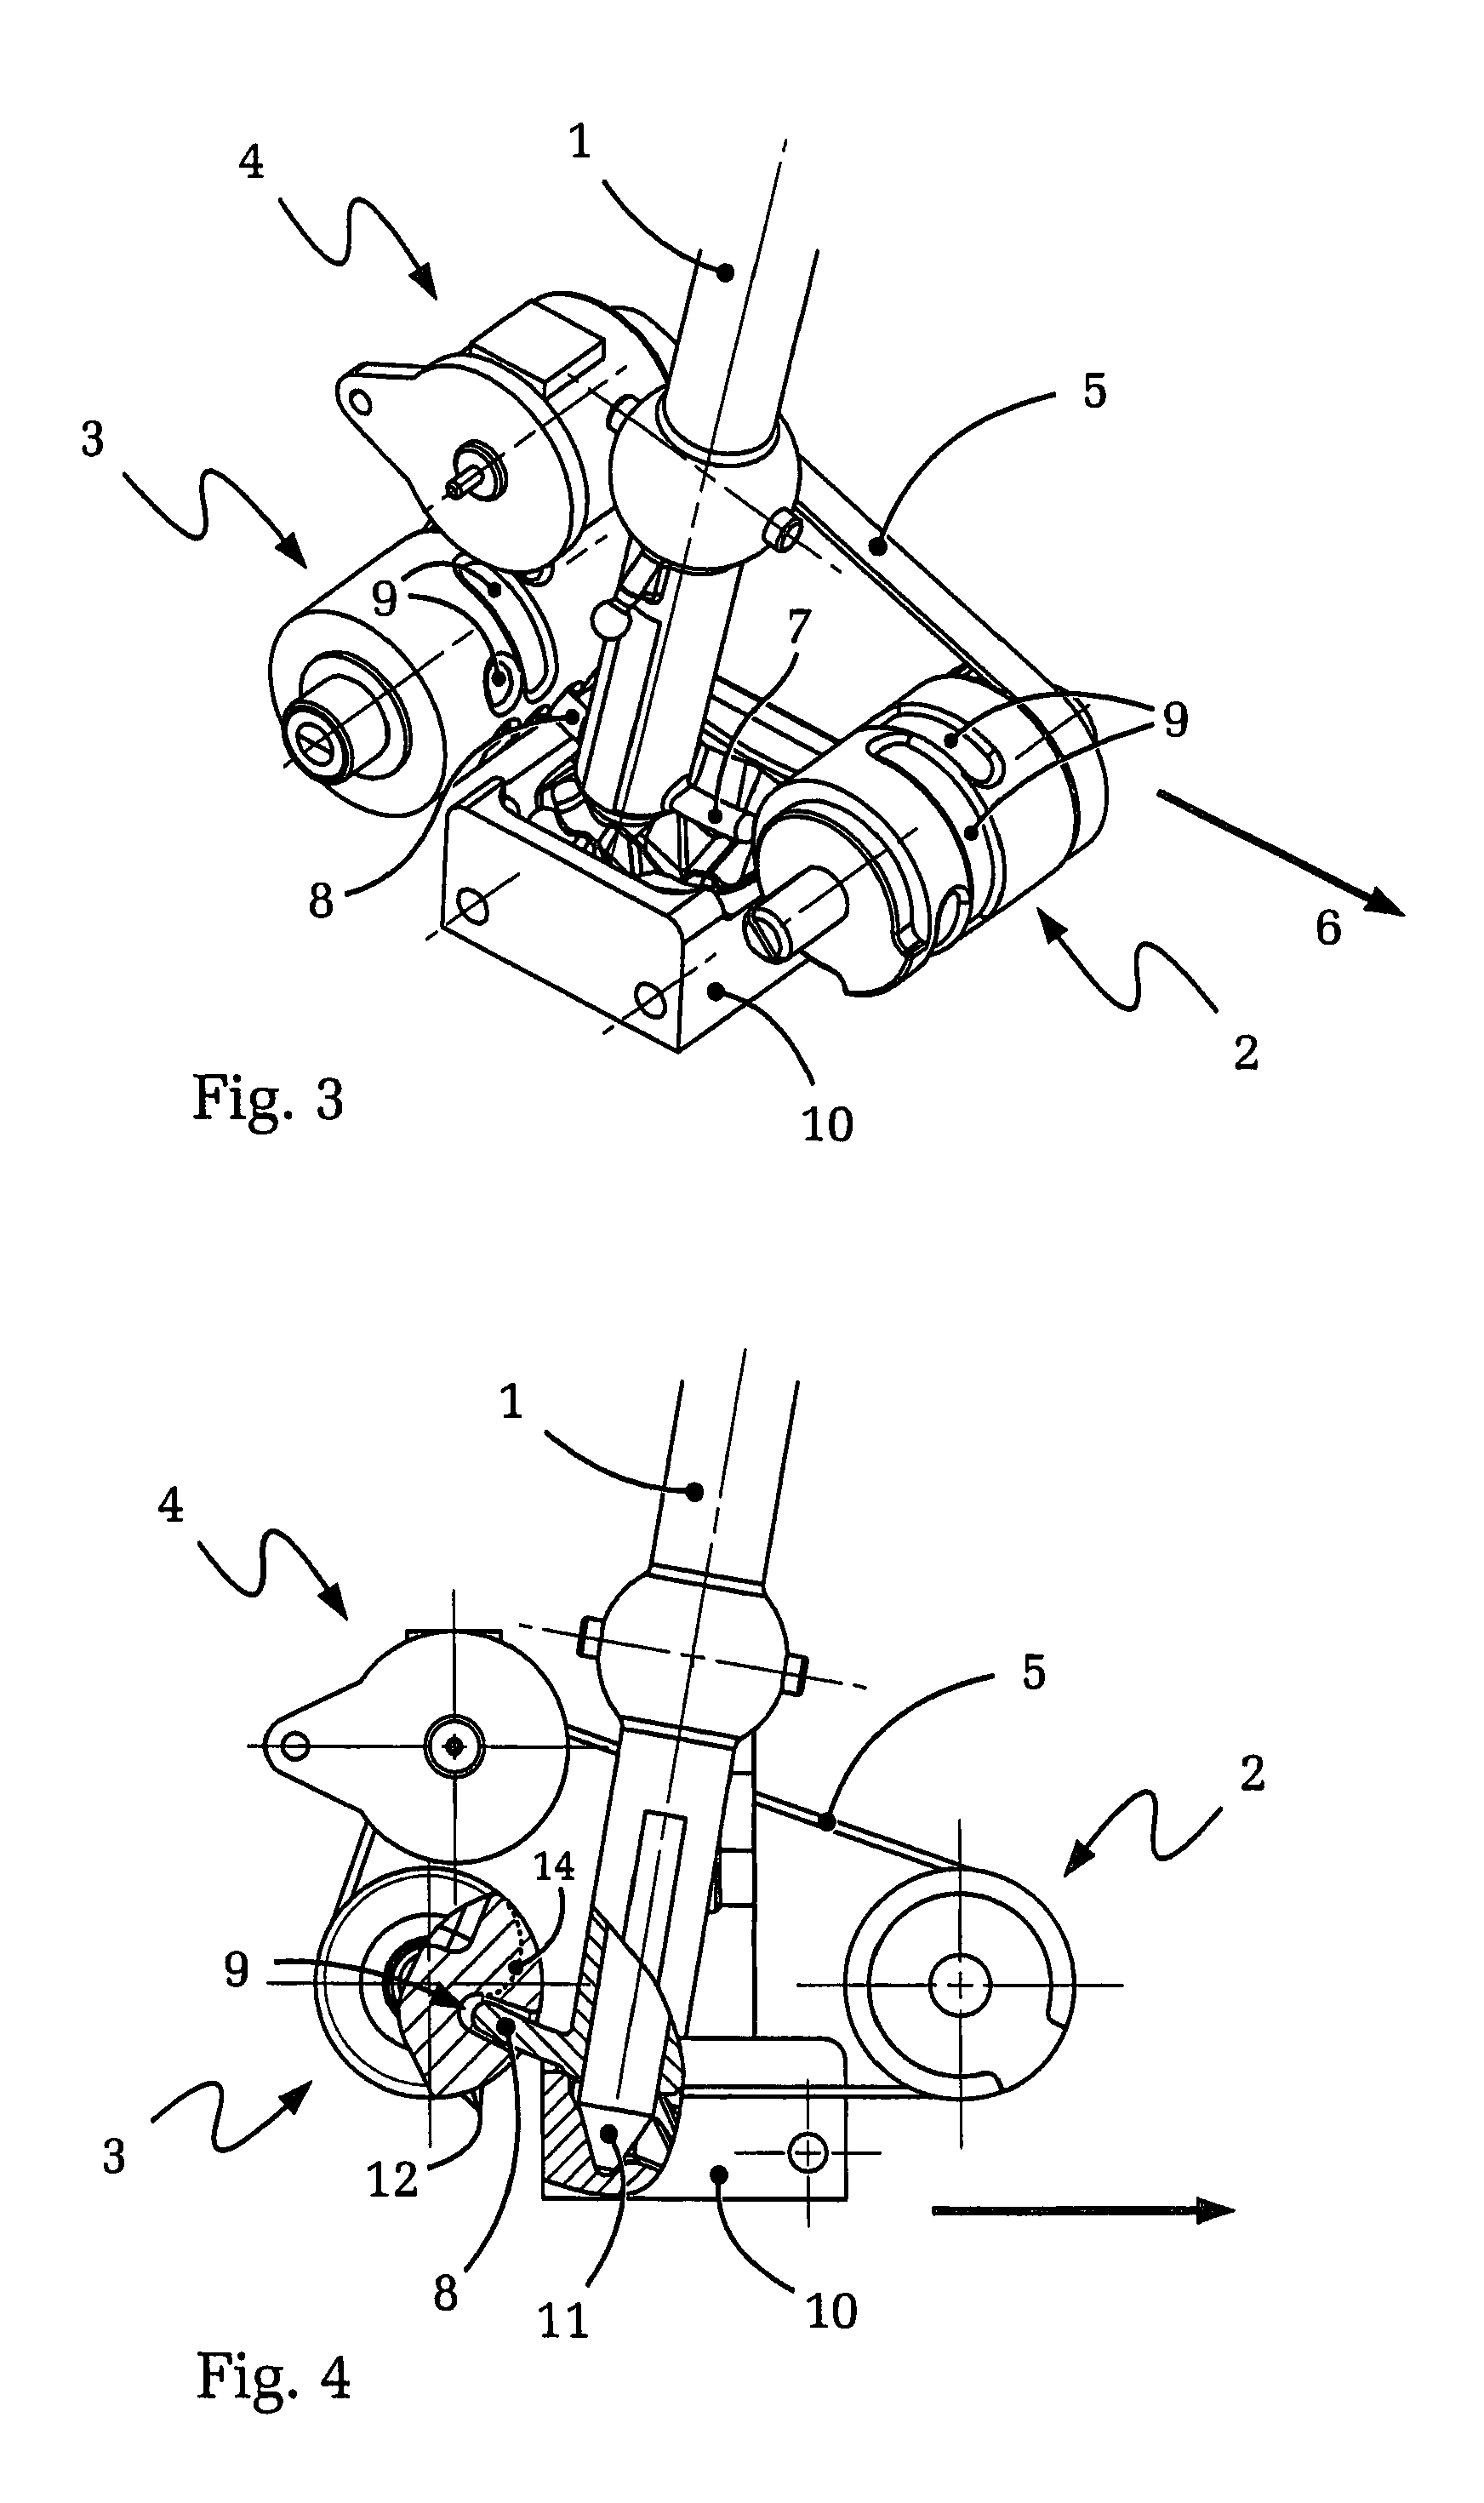 Actuating device having a locking roller